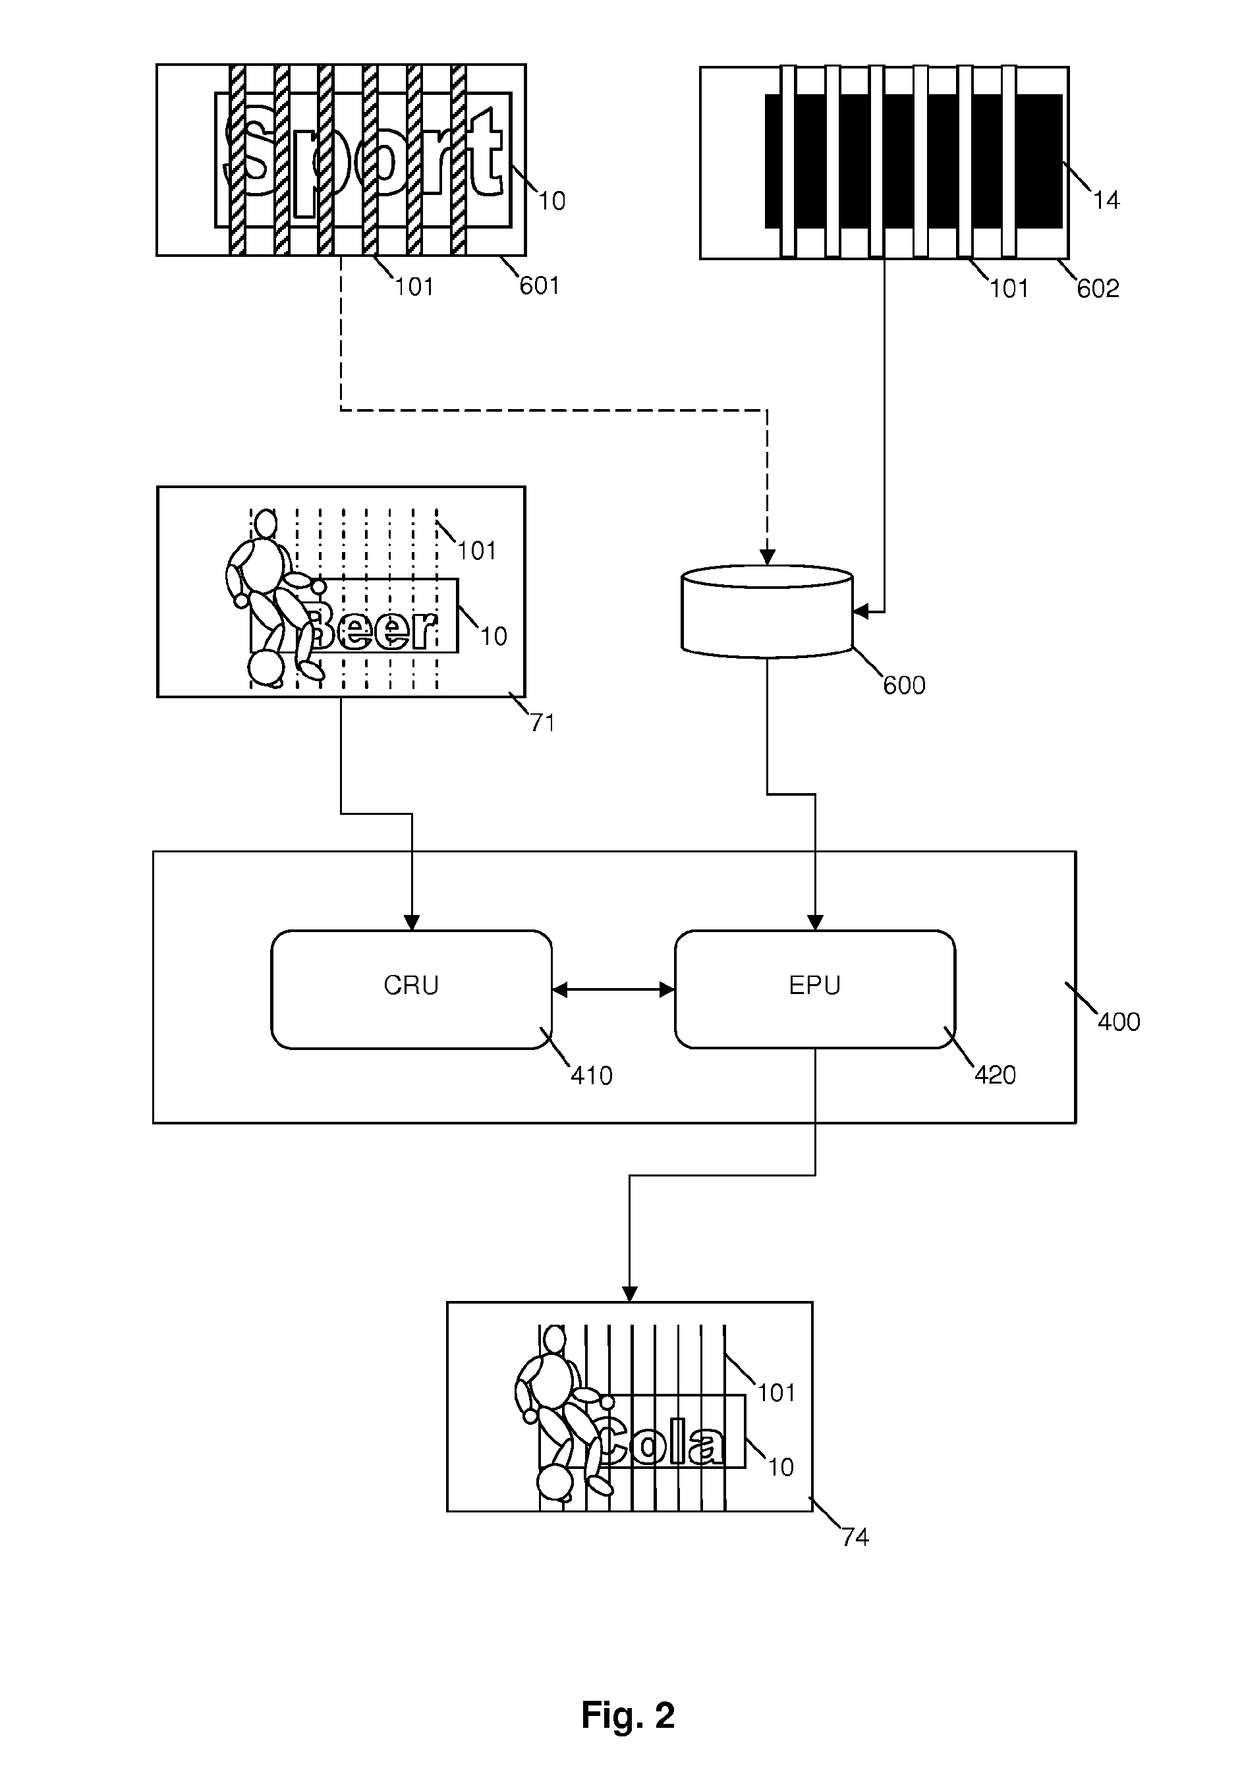 Method and apparatus for dynamic image content manipulation